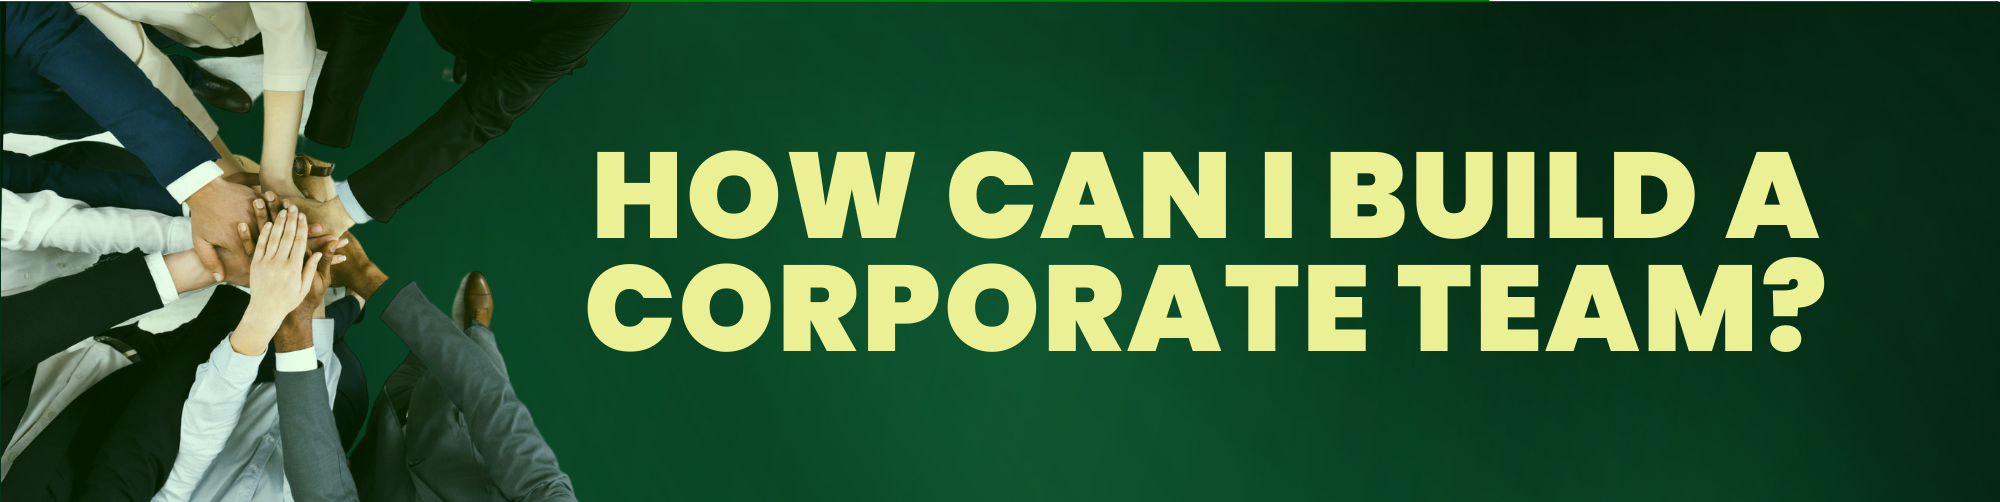 How can I build a Corporate TEAM Banner 15 -diarynigracia